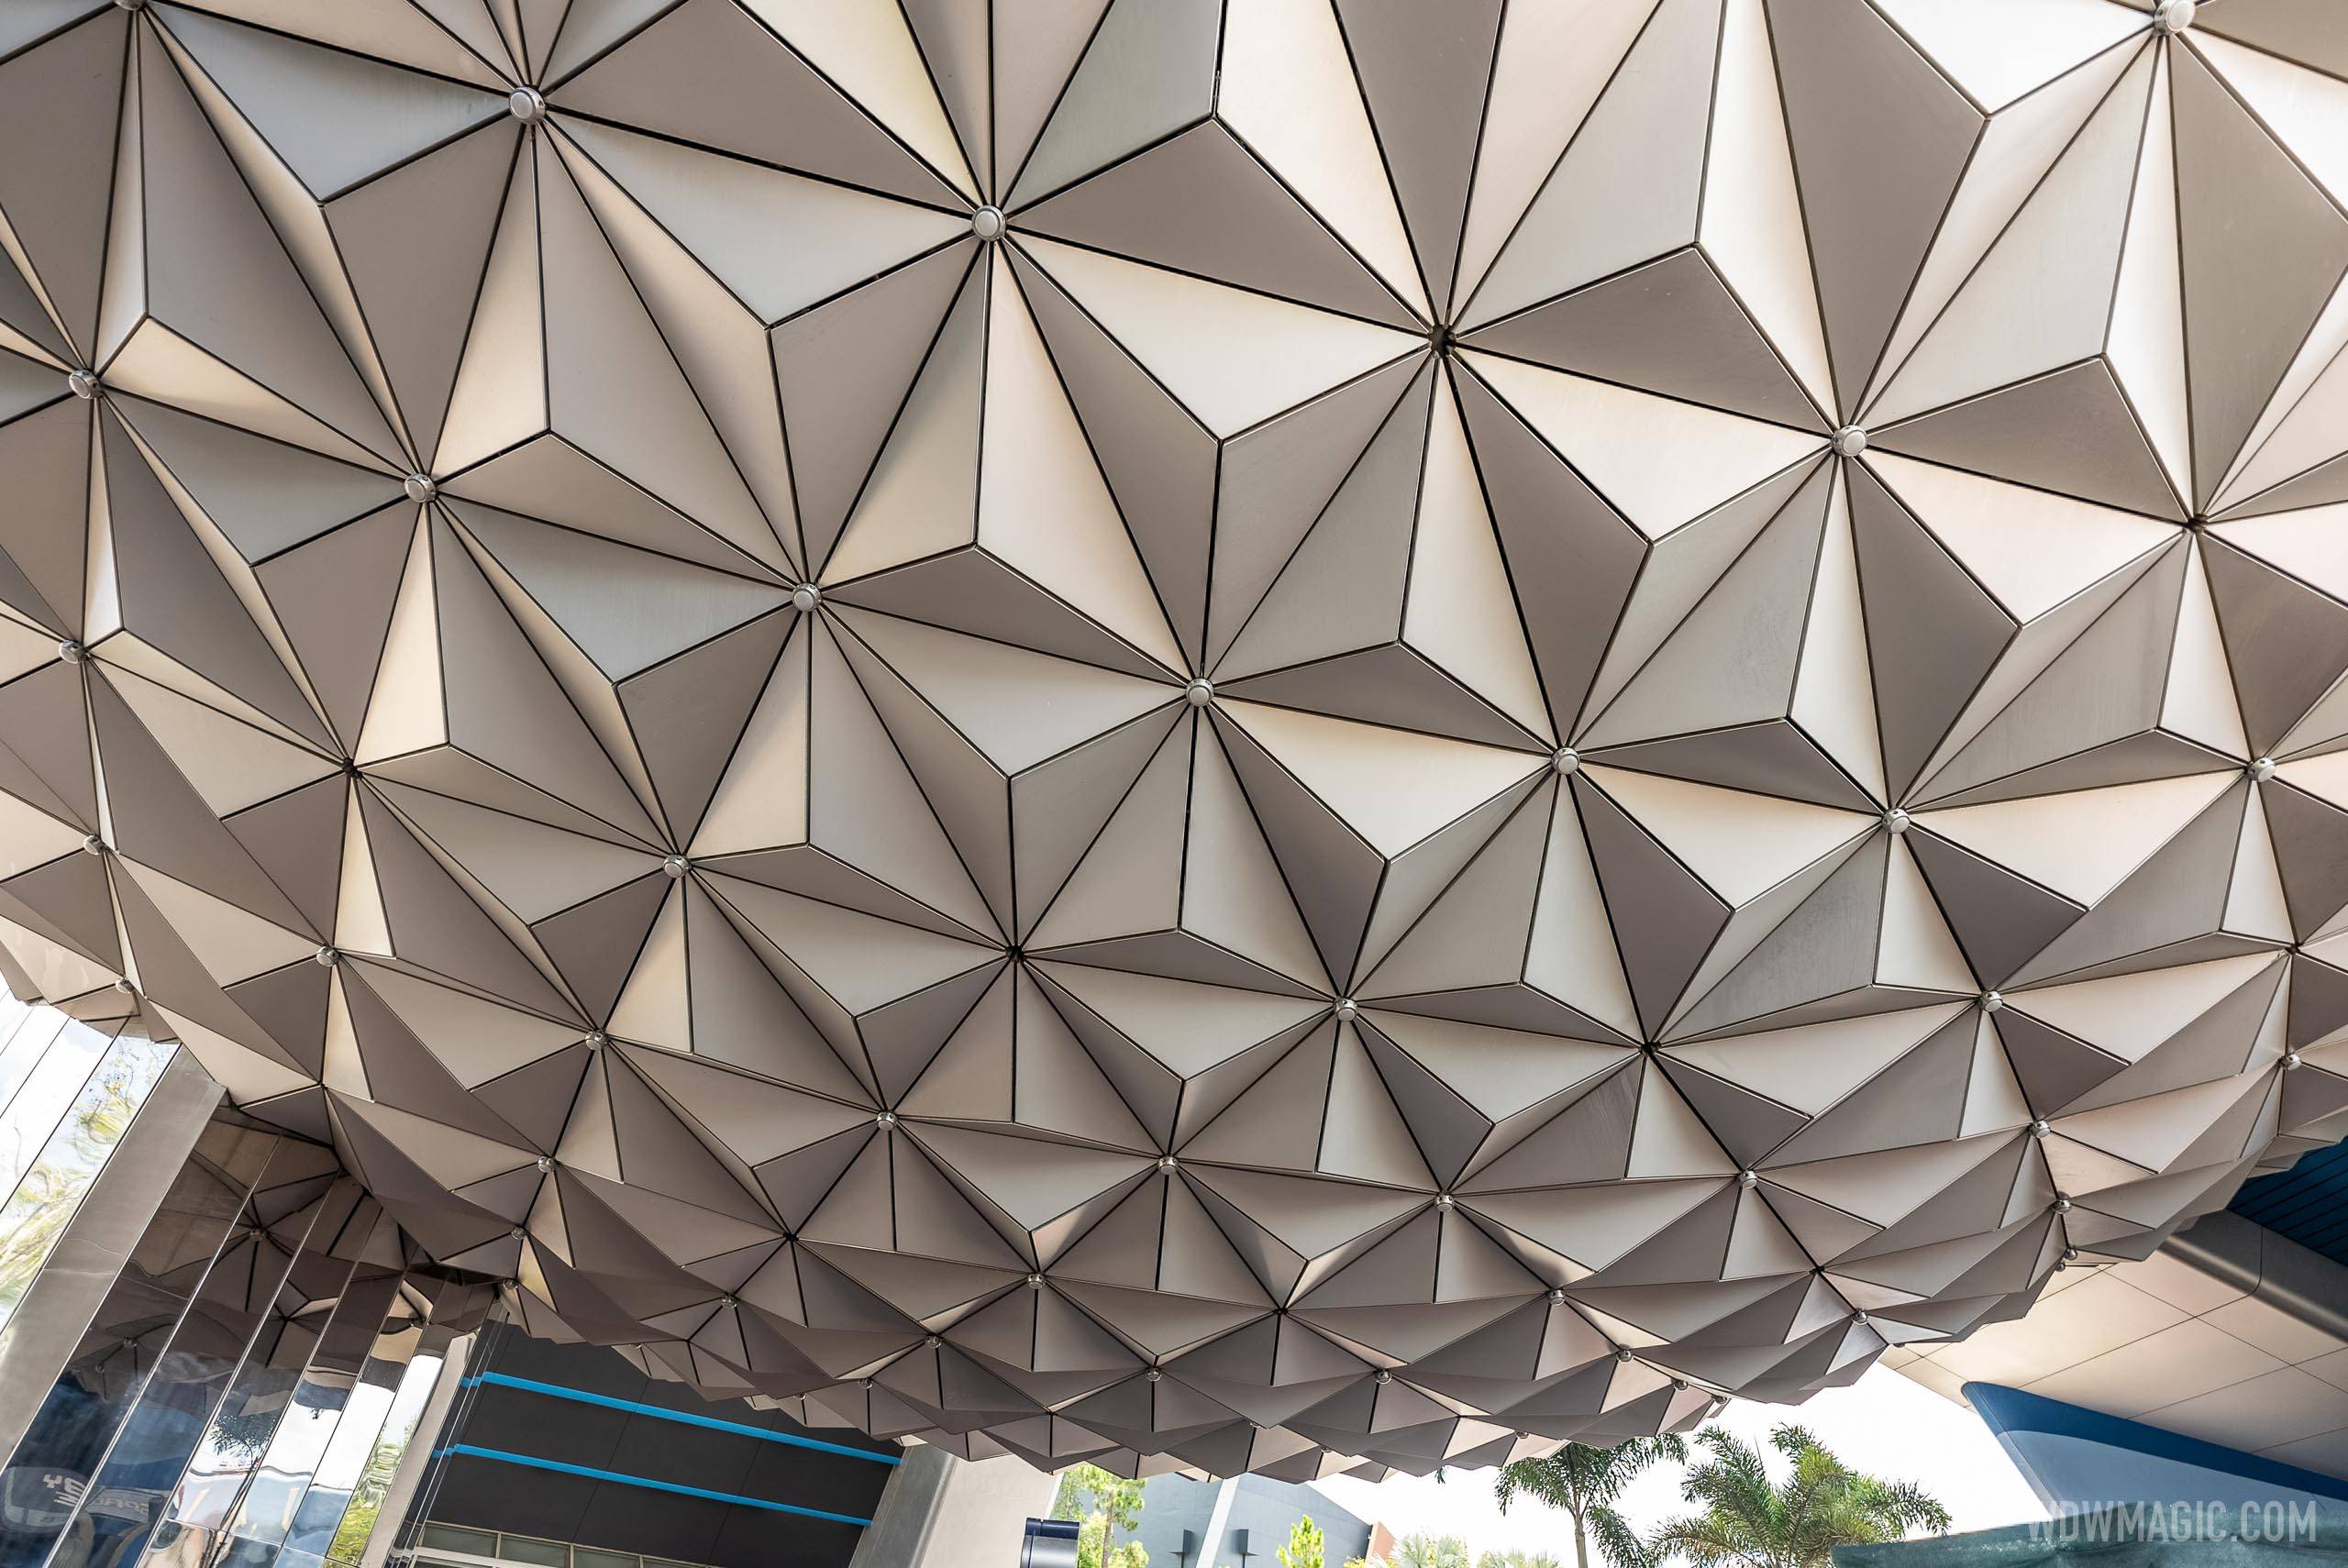 Spaceship Earth point of lights on the underside - June 9 2021